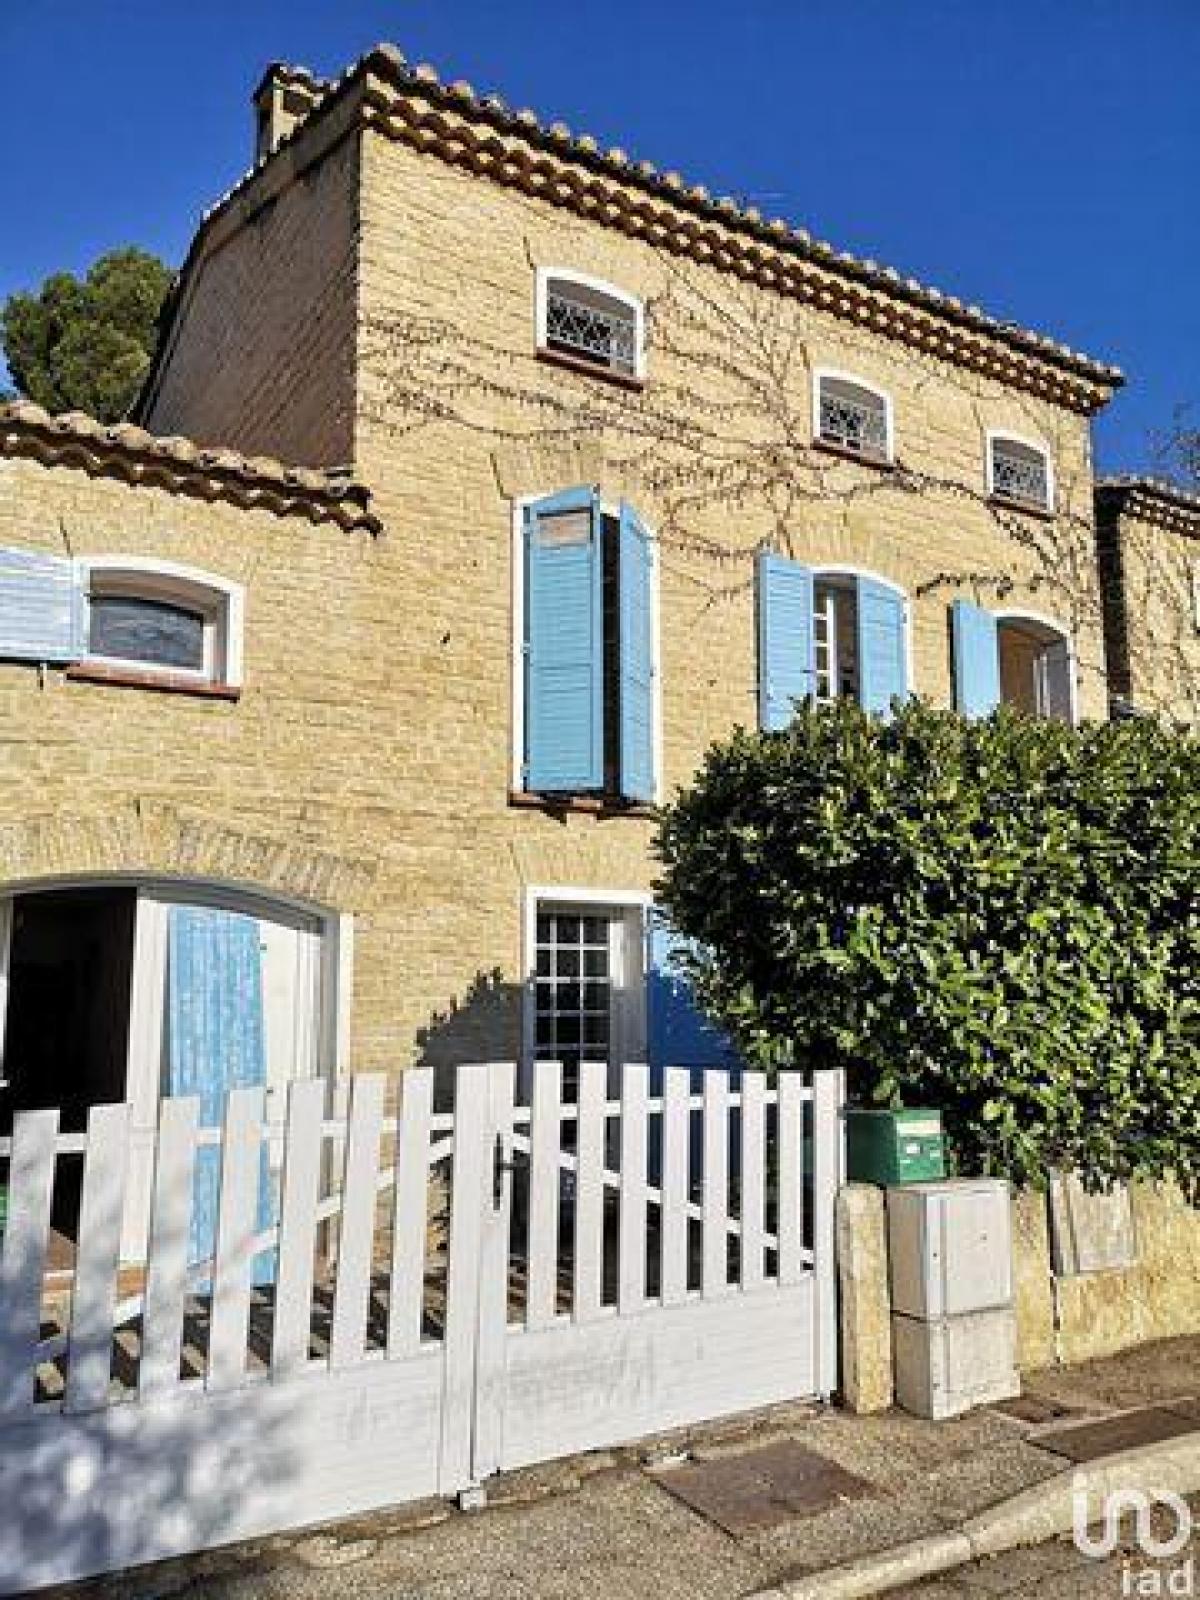 Picture of Home For Sale in Montfavet, Provence-Alpes-Cote d'Azur, France